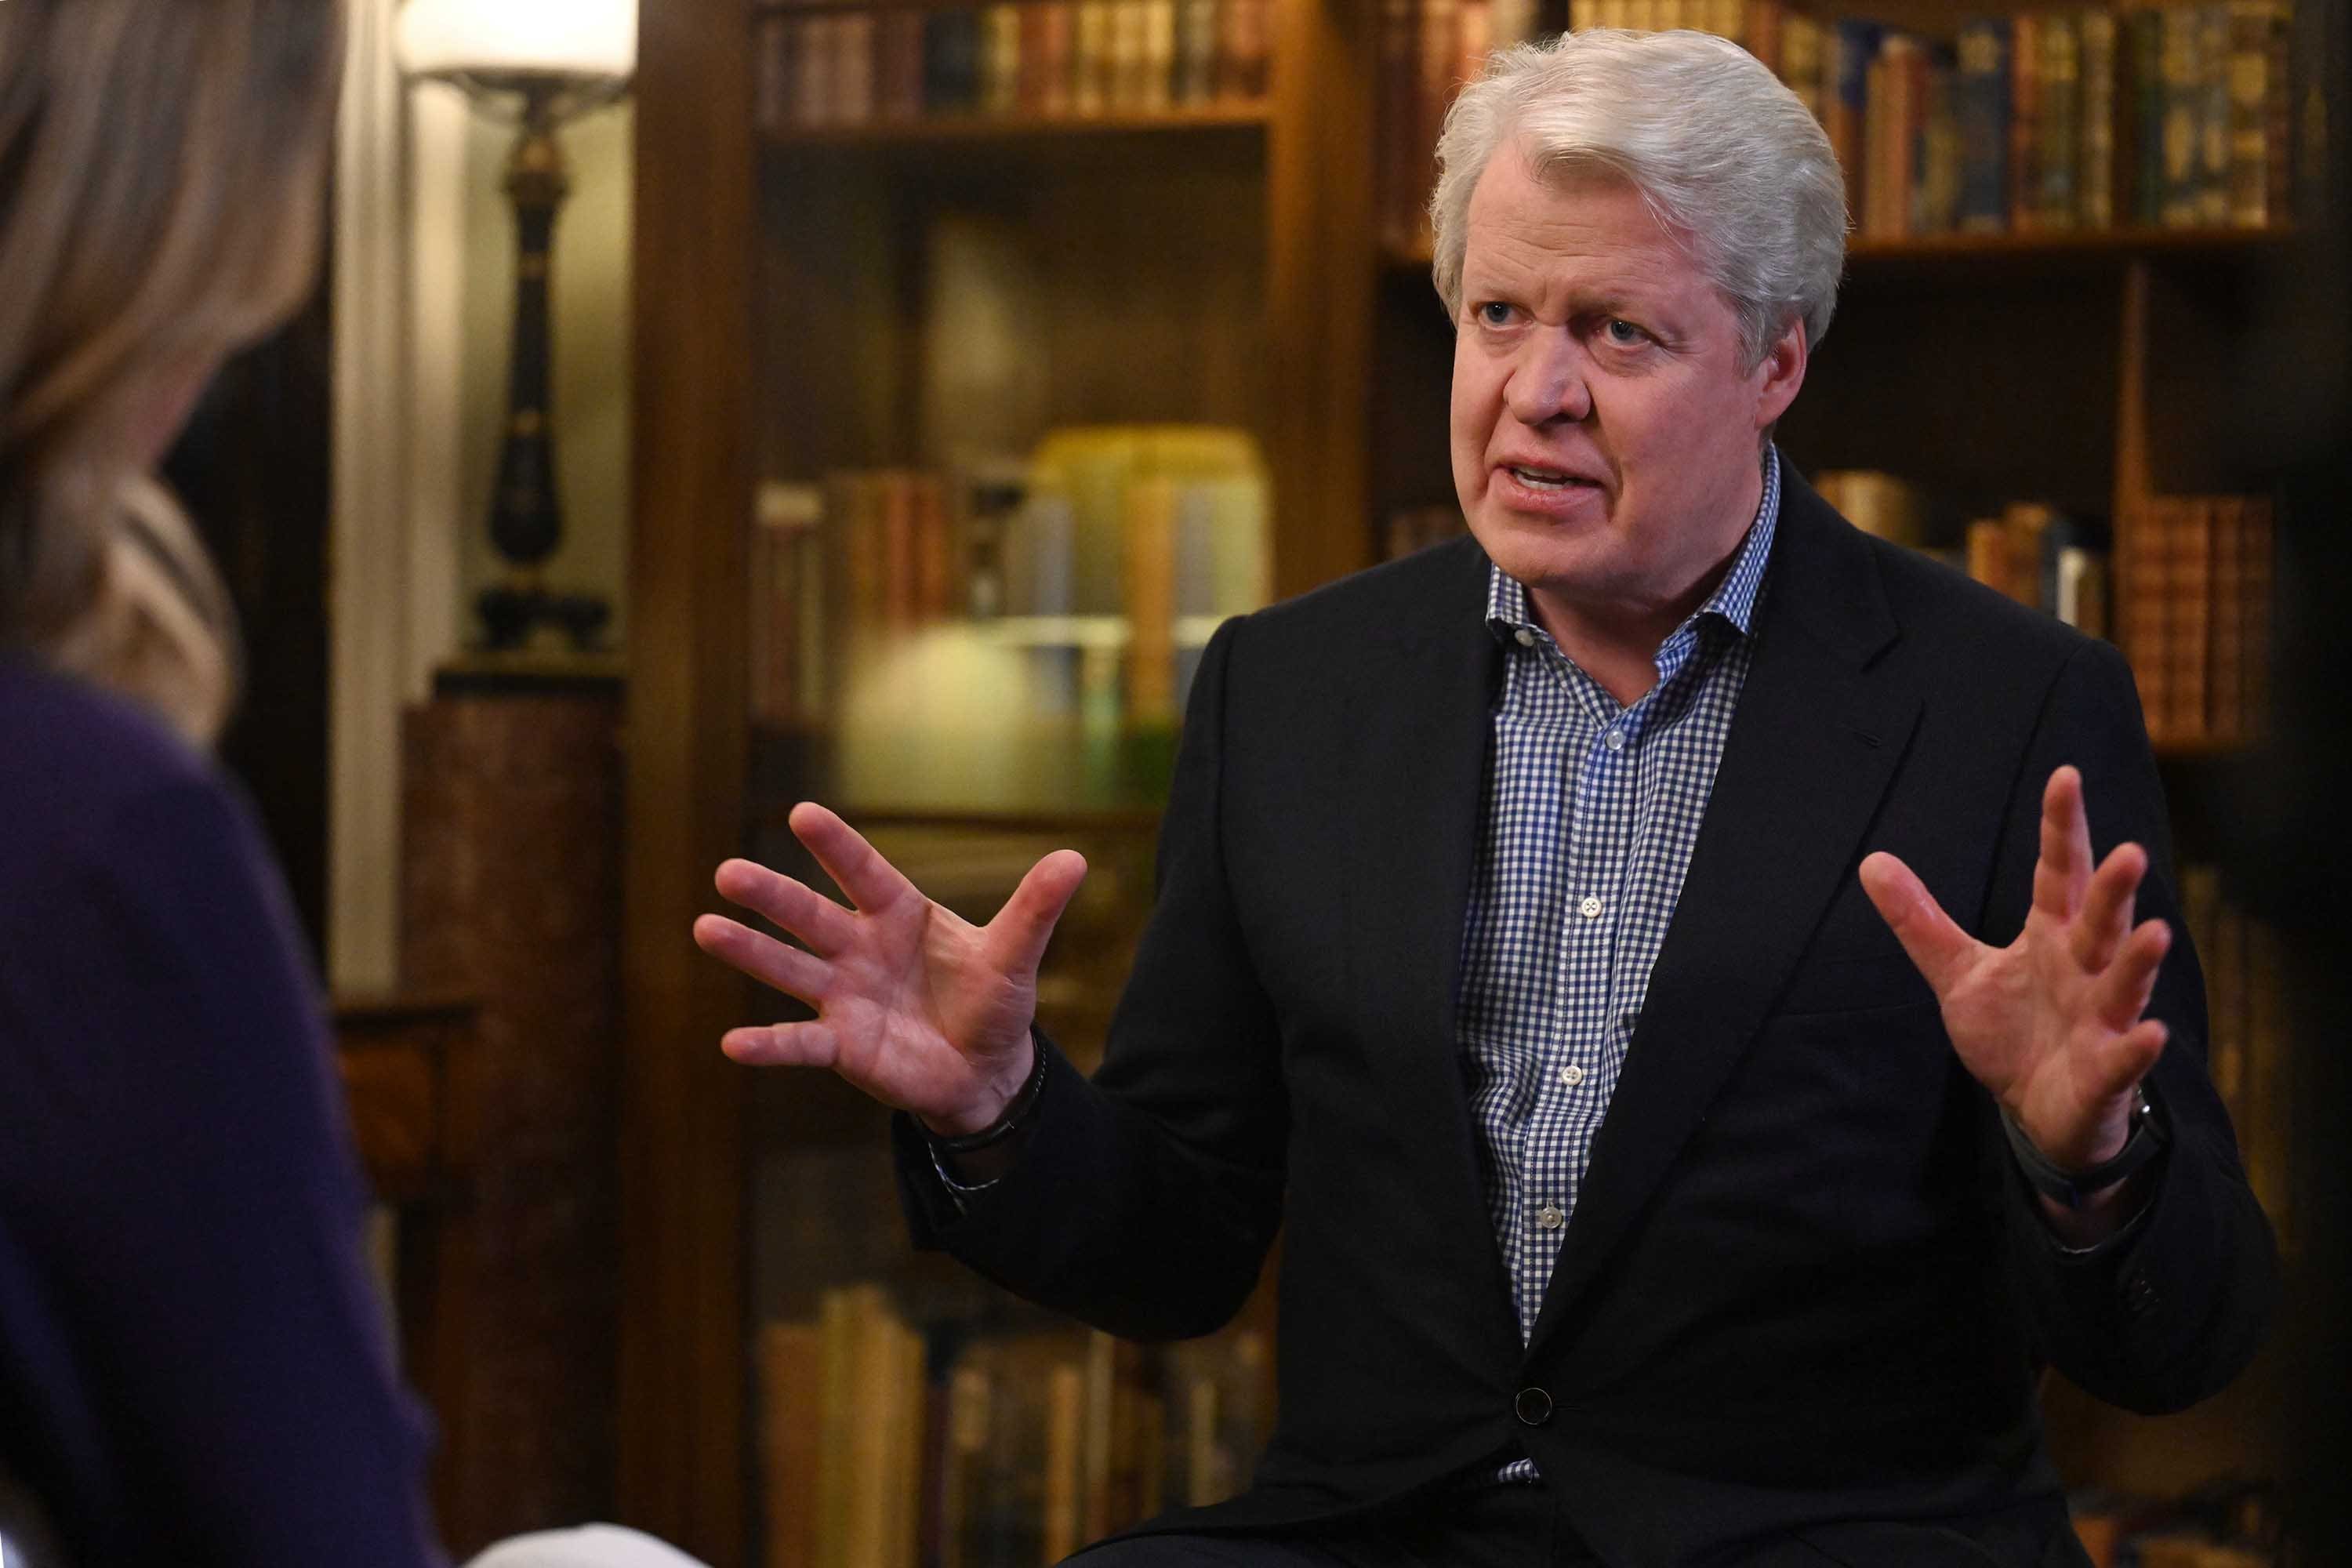 Charles Spencer, the 9th Earl Spencer, published his memoir earlier this year